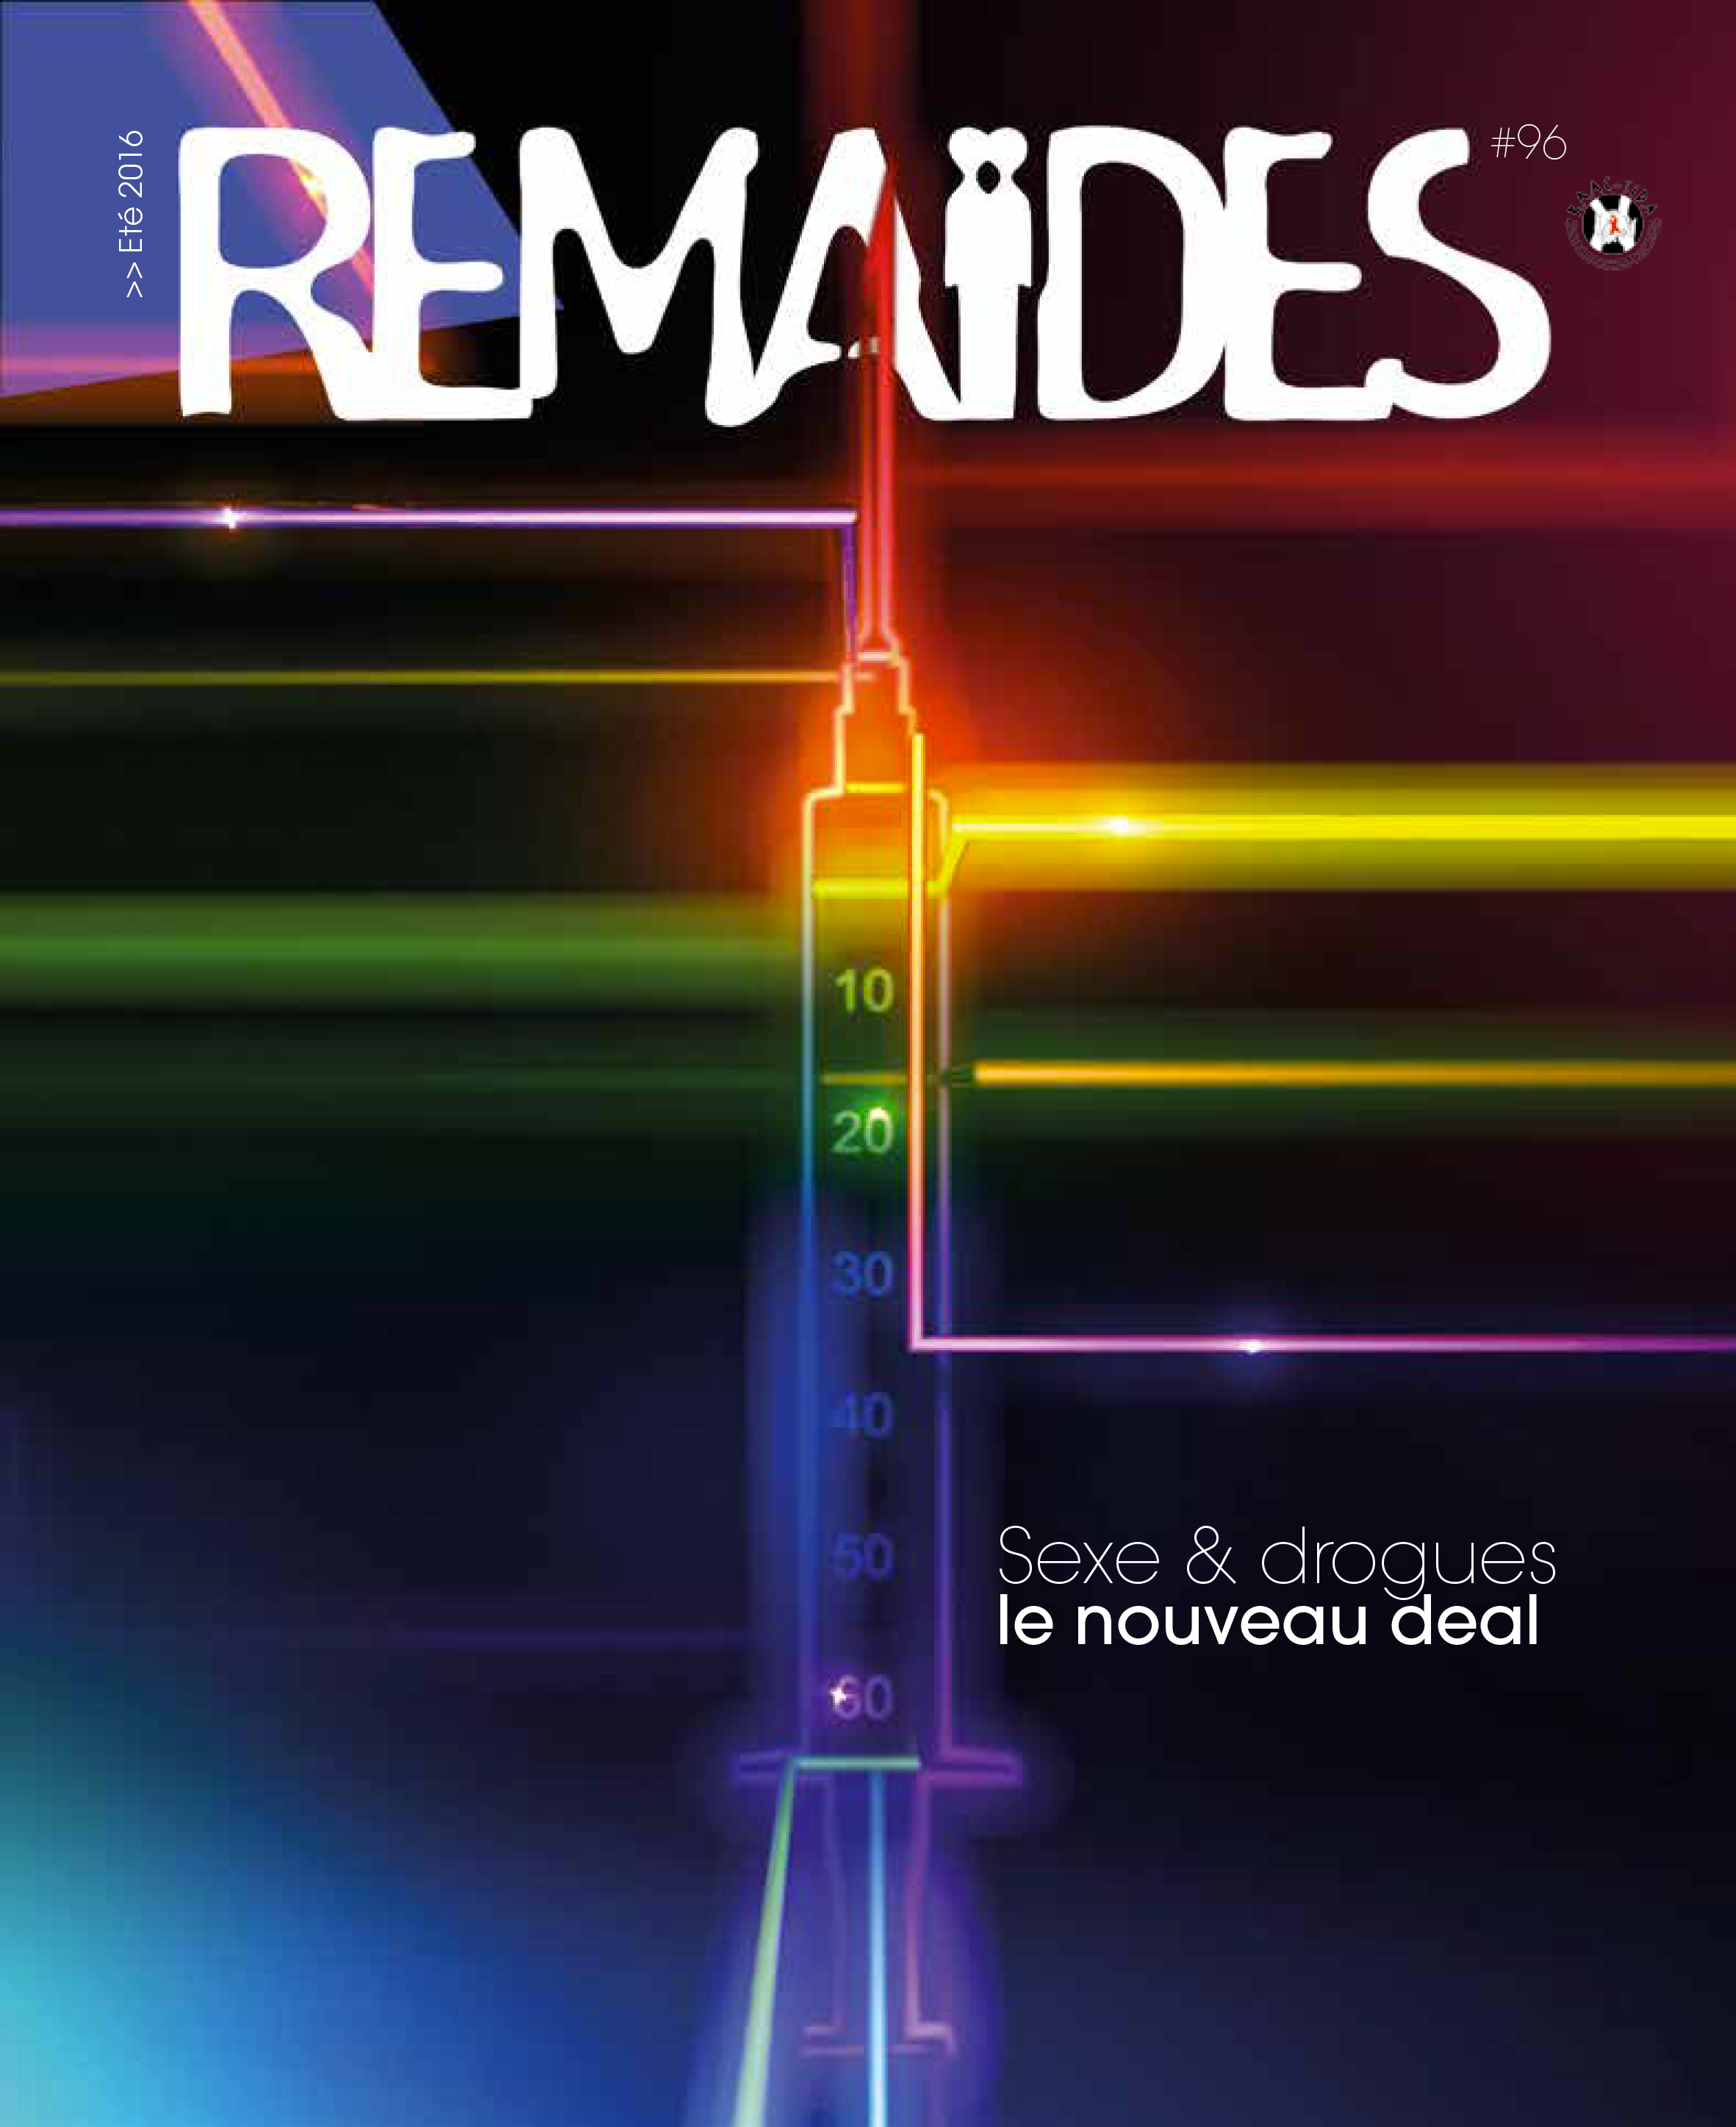 Remaides 96